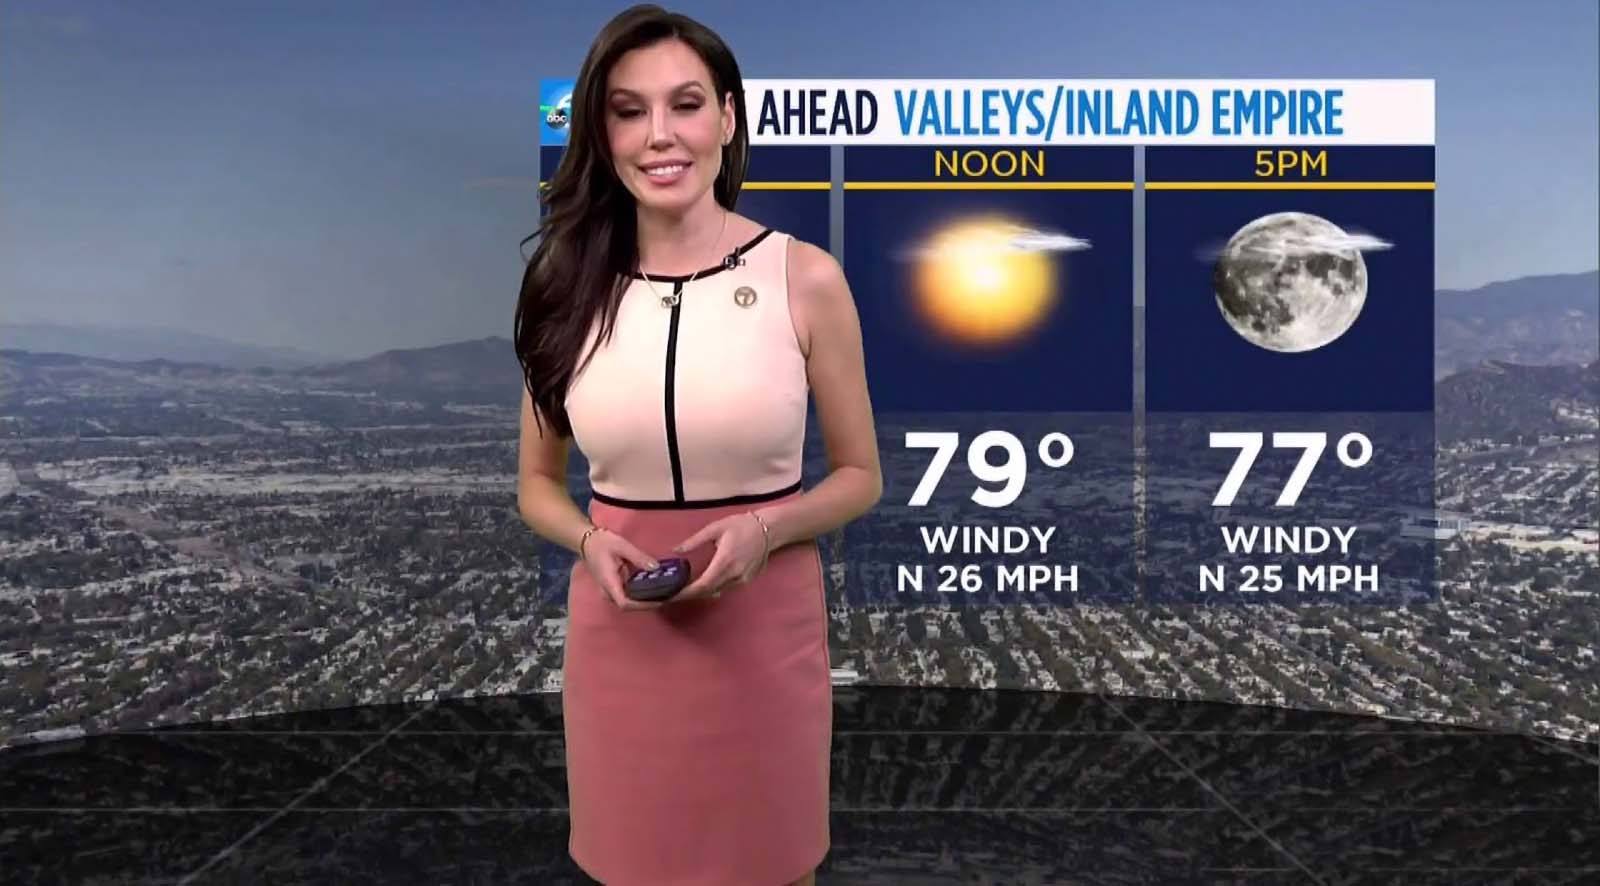 abc7 weather update